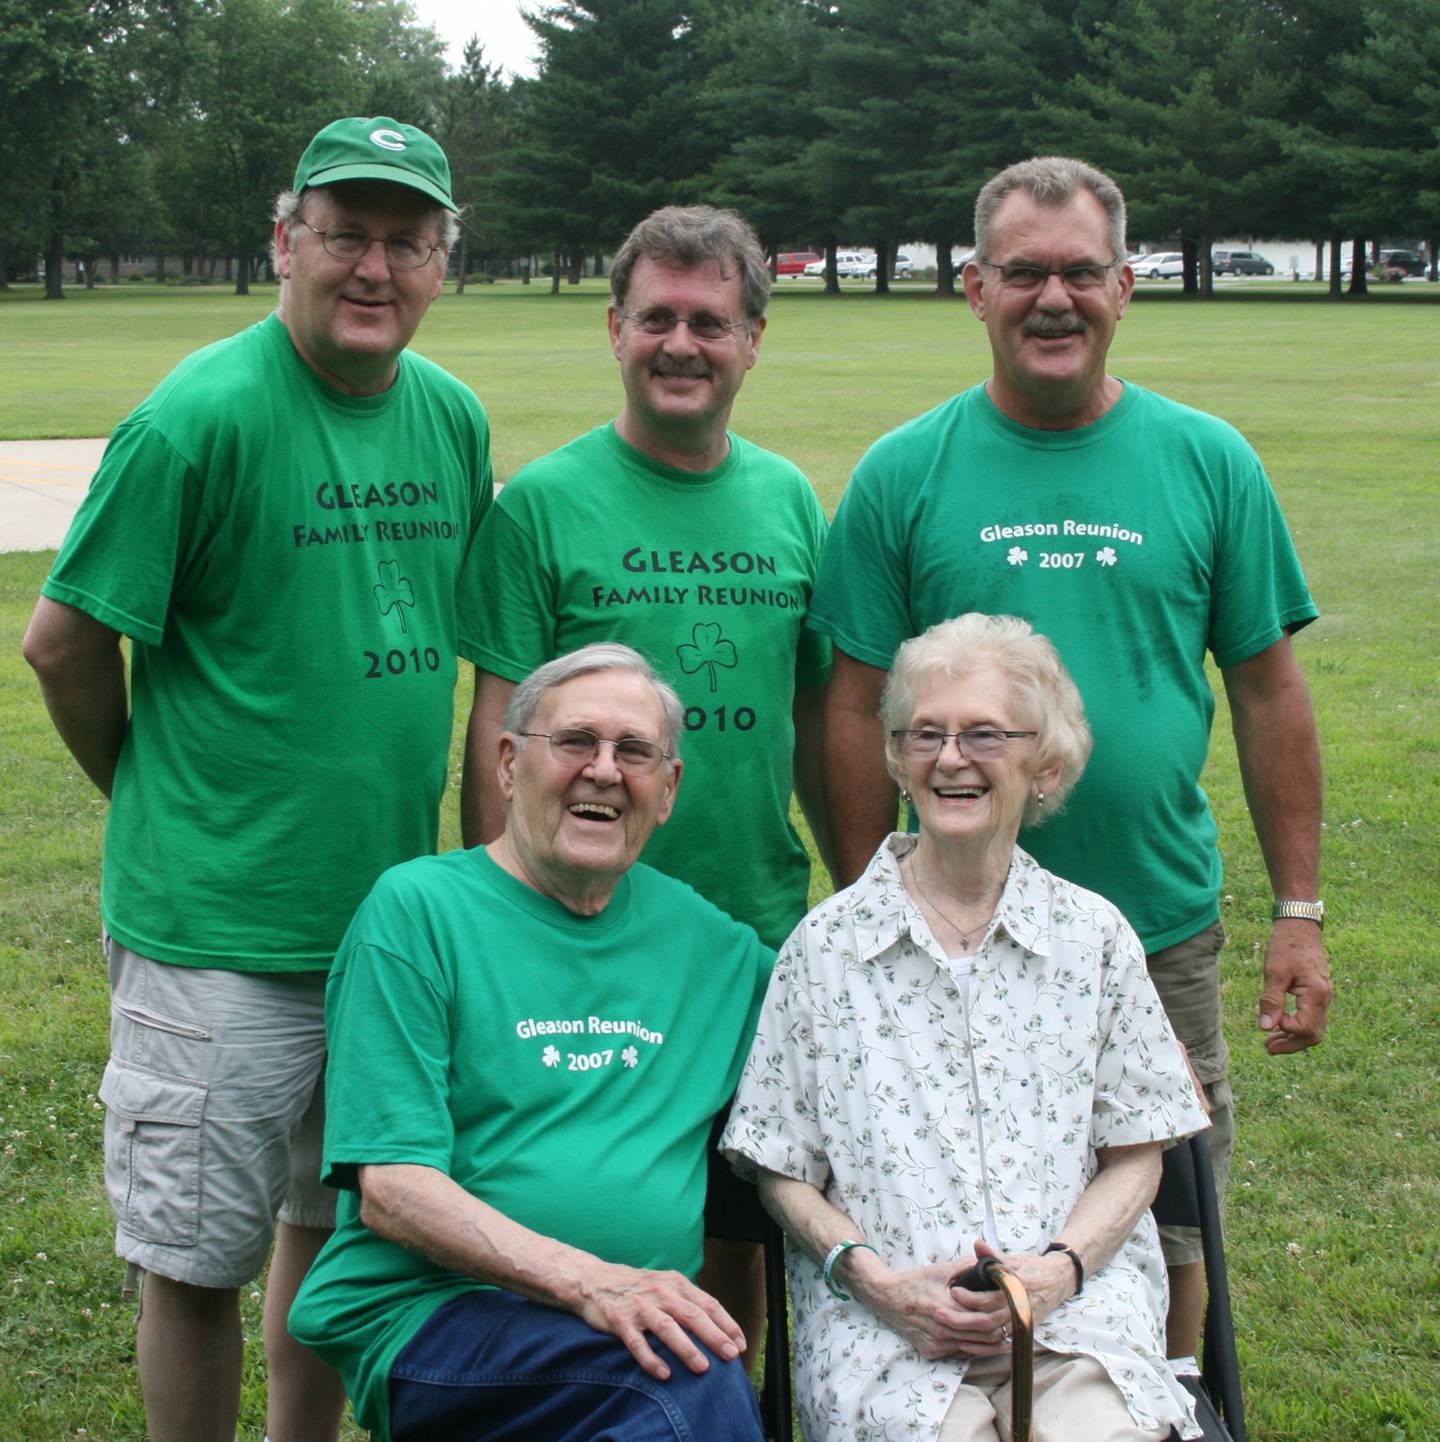 In 2013, Glenn and Helen Masekt and their three children attended the Gleason Family Reunion, celebrating with Helen’s side of the family.  In the back row are their three sons, Mark, Terry and Rick.